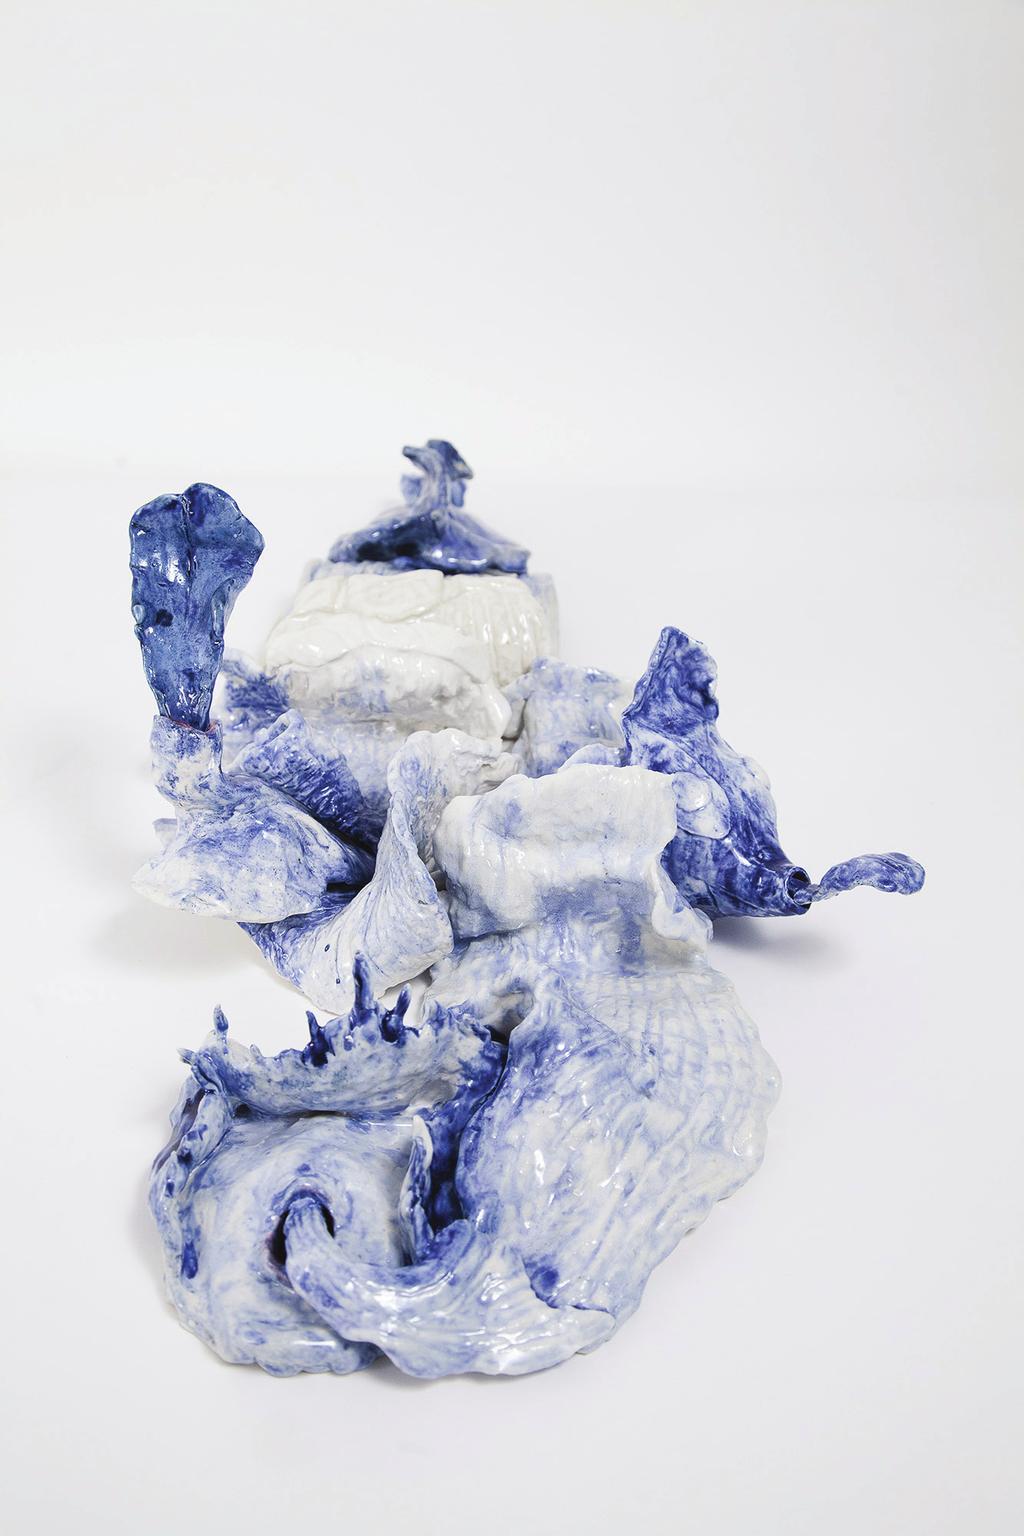 Galeria Nara Roesler São Paulo presents A Carne do Mar [The Flesh of the Ocean], solo show by artist Brigida Baltar curated by Marcelo Campos in which the artist presents 12 sculptures of ceramics or